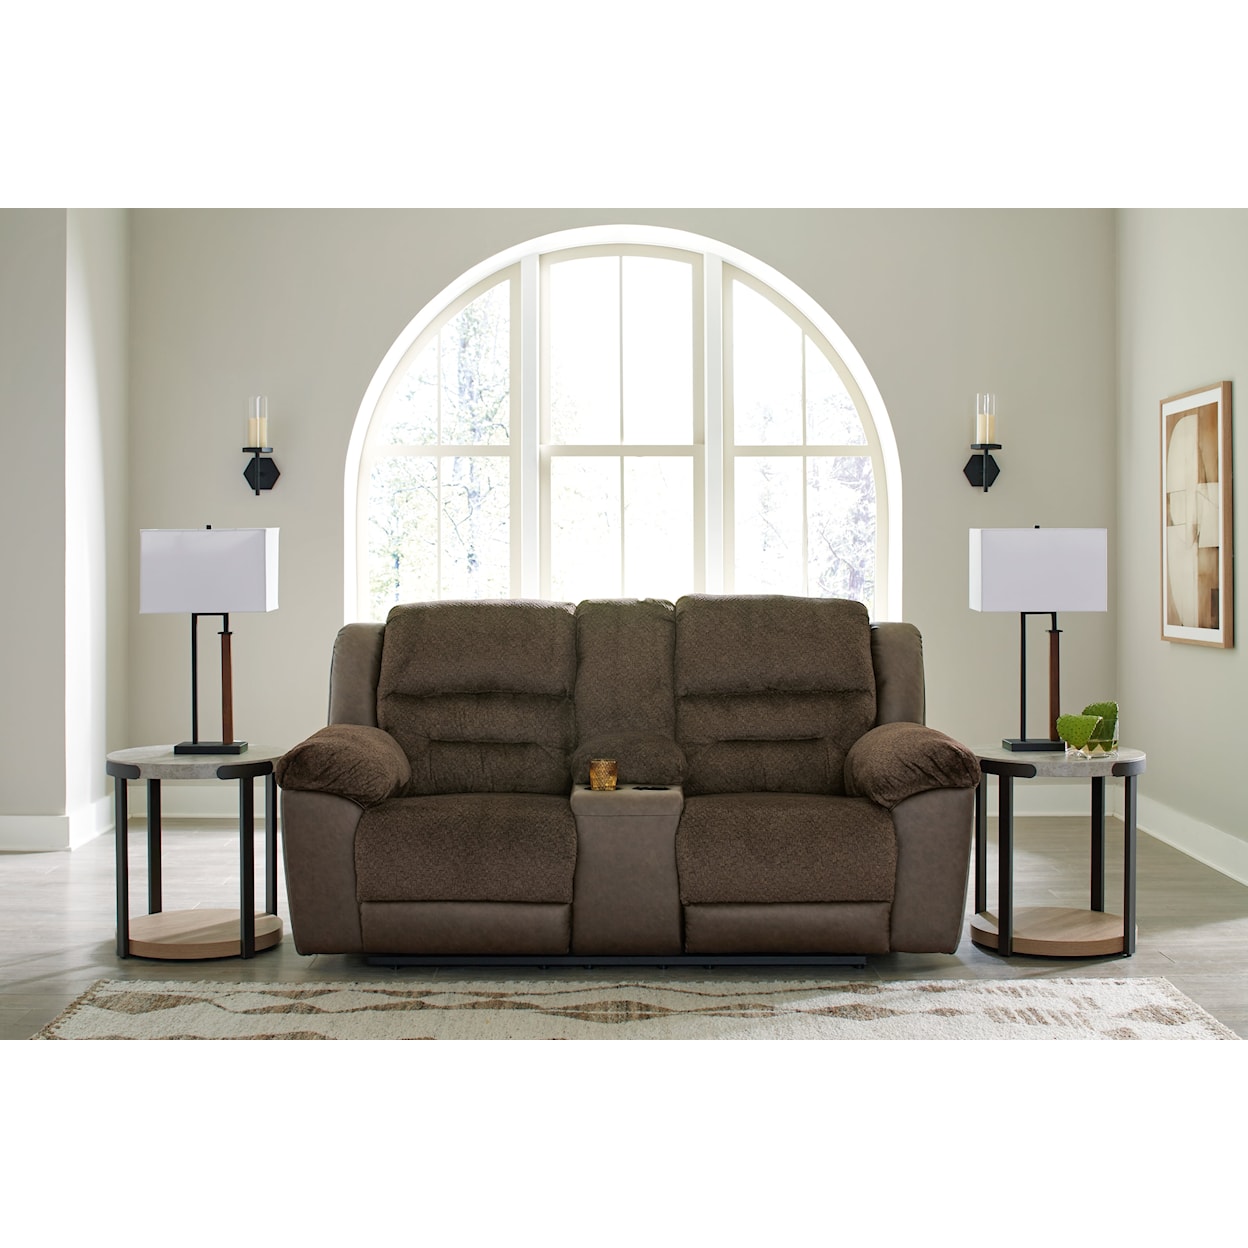 Benchcraft Dorman Reclining Loveseat With Console